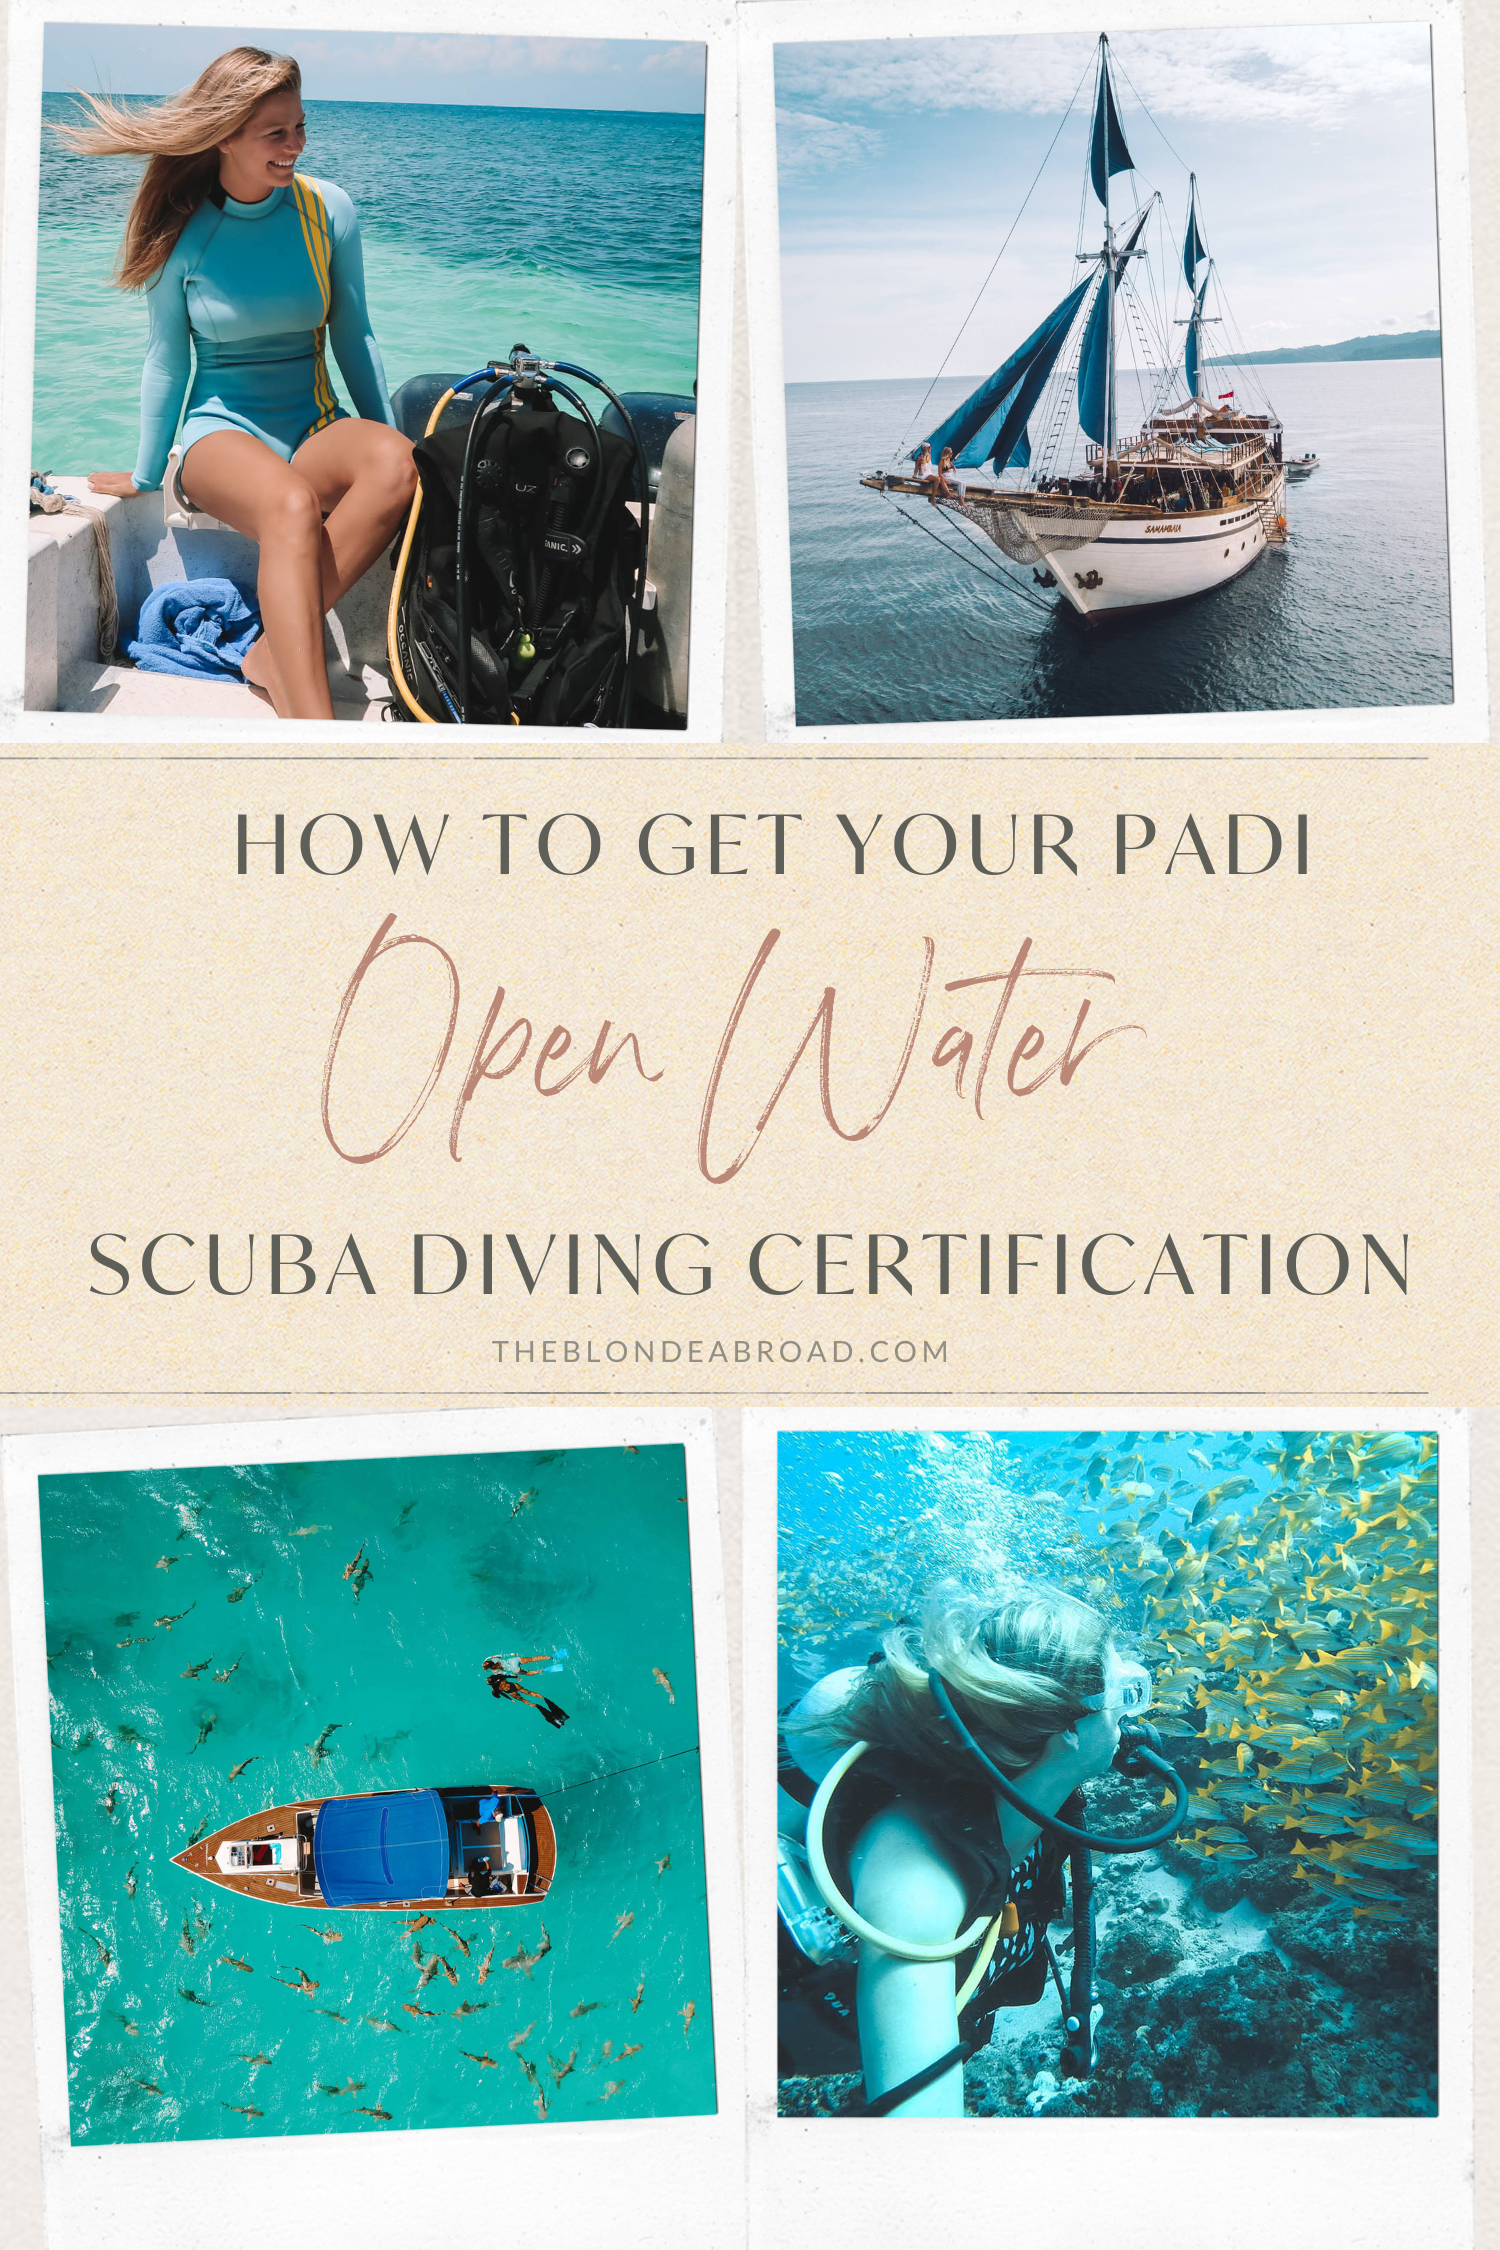 How to Get Your PADI Open Water Scuba Diving1 Certification